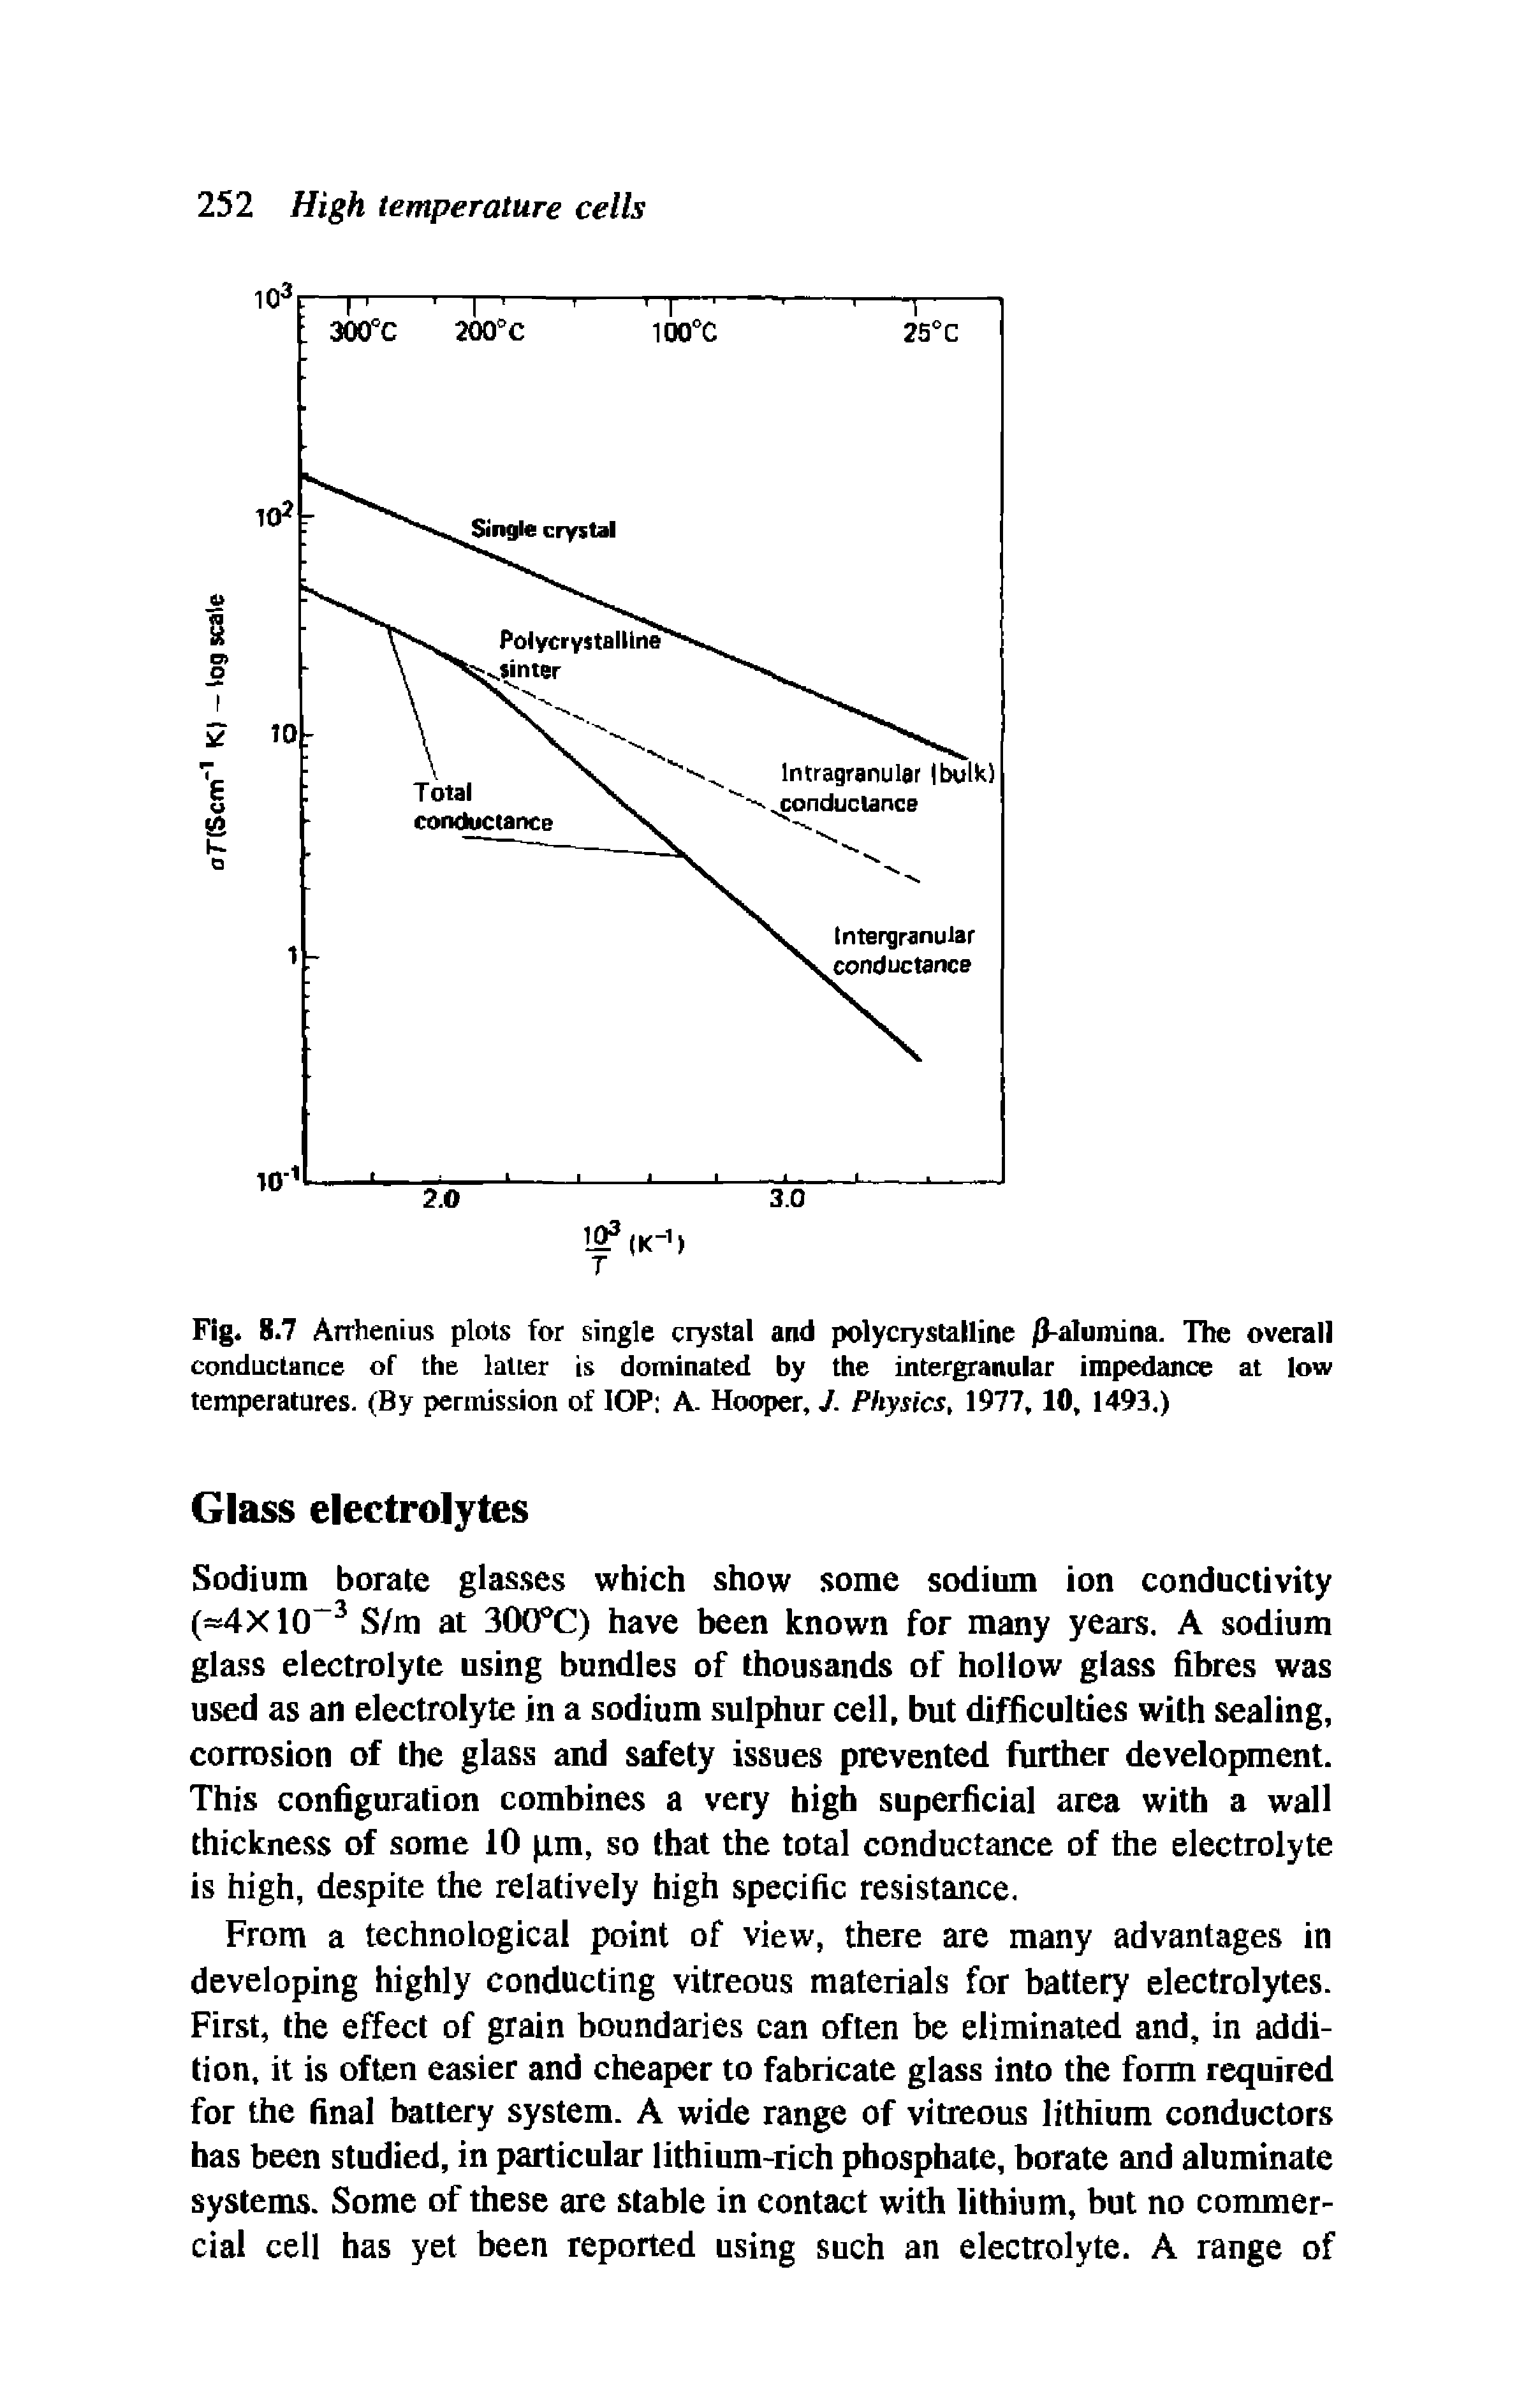 Fig. 8.7 Arrhenius plots for single crystal and polycrystalline j3-alumina. The overall conductance of the laUer is dominated by the intergranular impedance at low temperatures. (By permission of IOP A. Hooper, J. Physics, 1977,10, 1493.)...